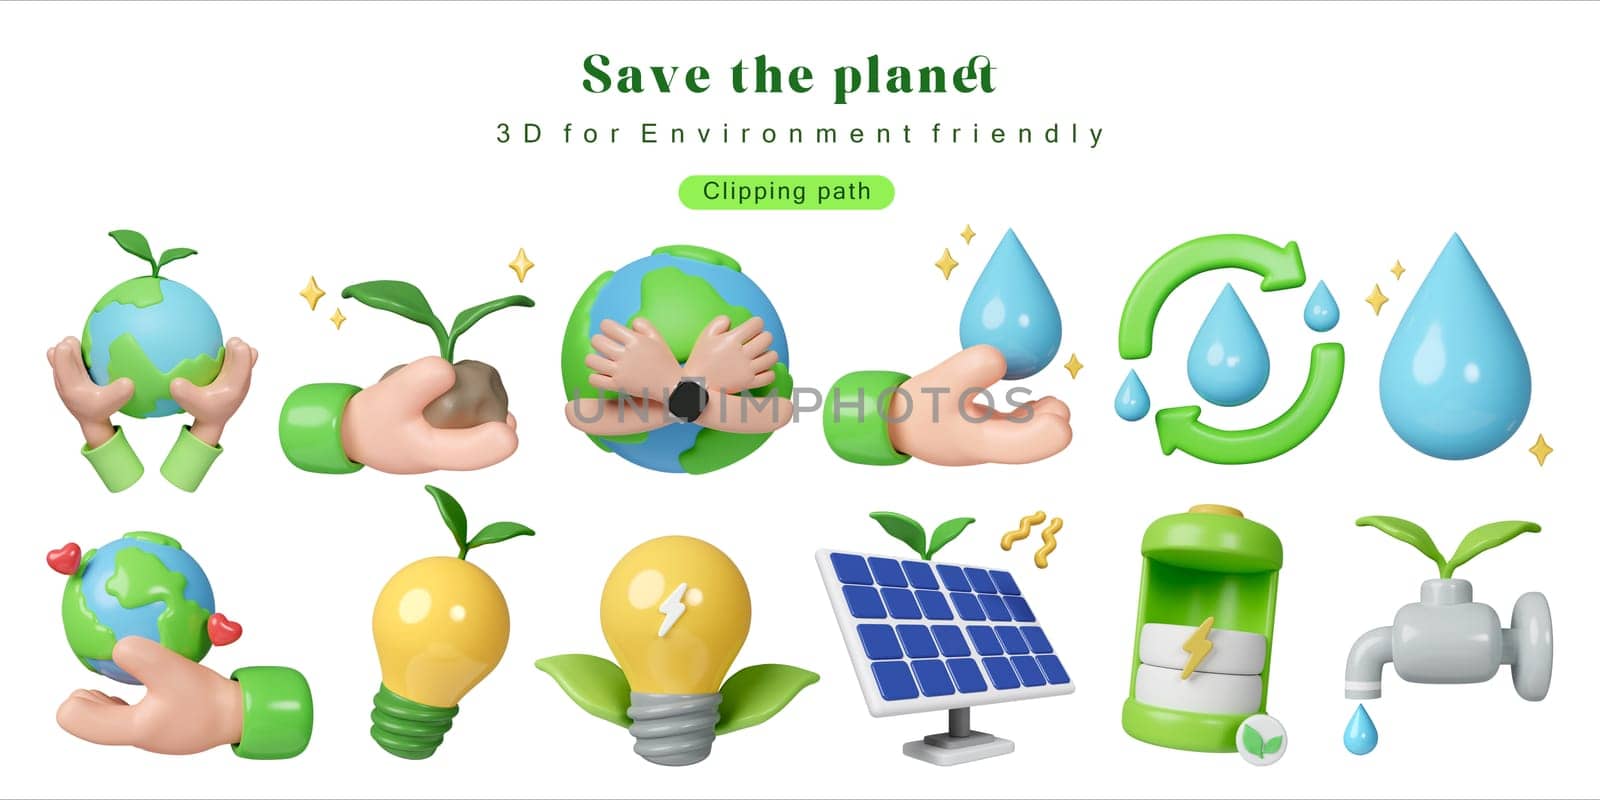 Eco Global Warming icon set Illustration Eco global warming icons for Environment friendly or recycling concept illustration for Sticker, poster, web, mobile, social media post. 3D Illustration.